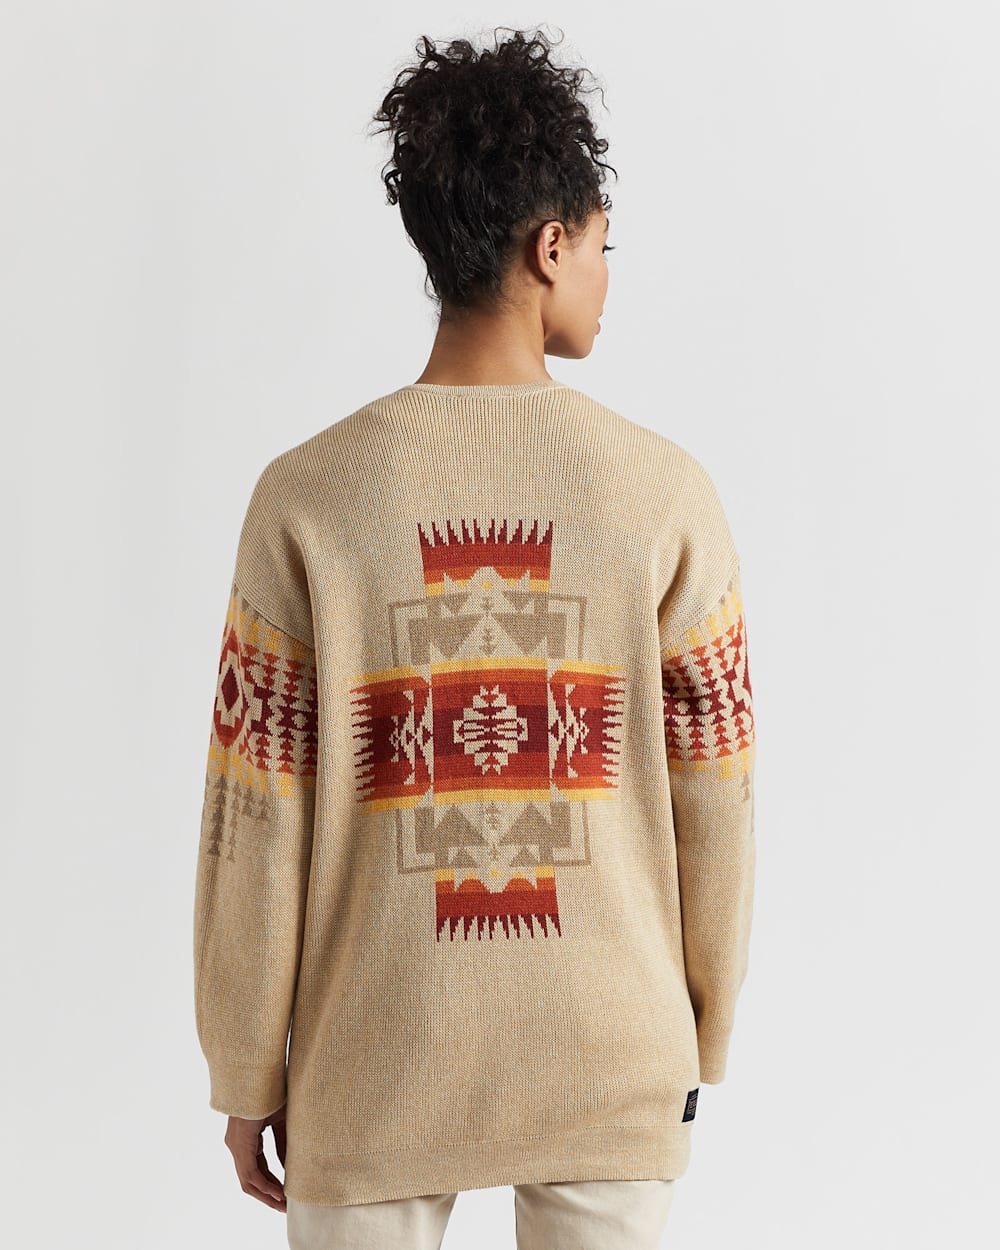 ALTERNATE VIEW OF WOMEN'S OPEN FRONT COTTON CARDIGAN IN WARM SAND CHIEF JOSEPH image number 2